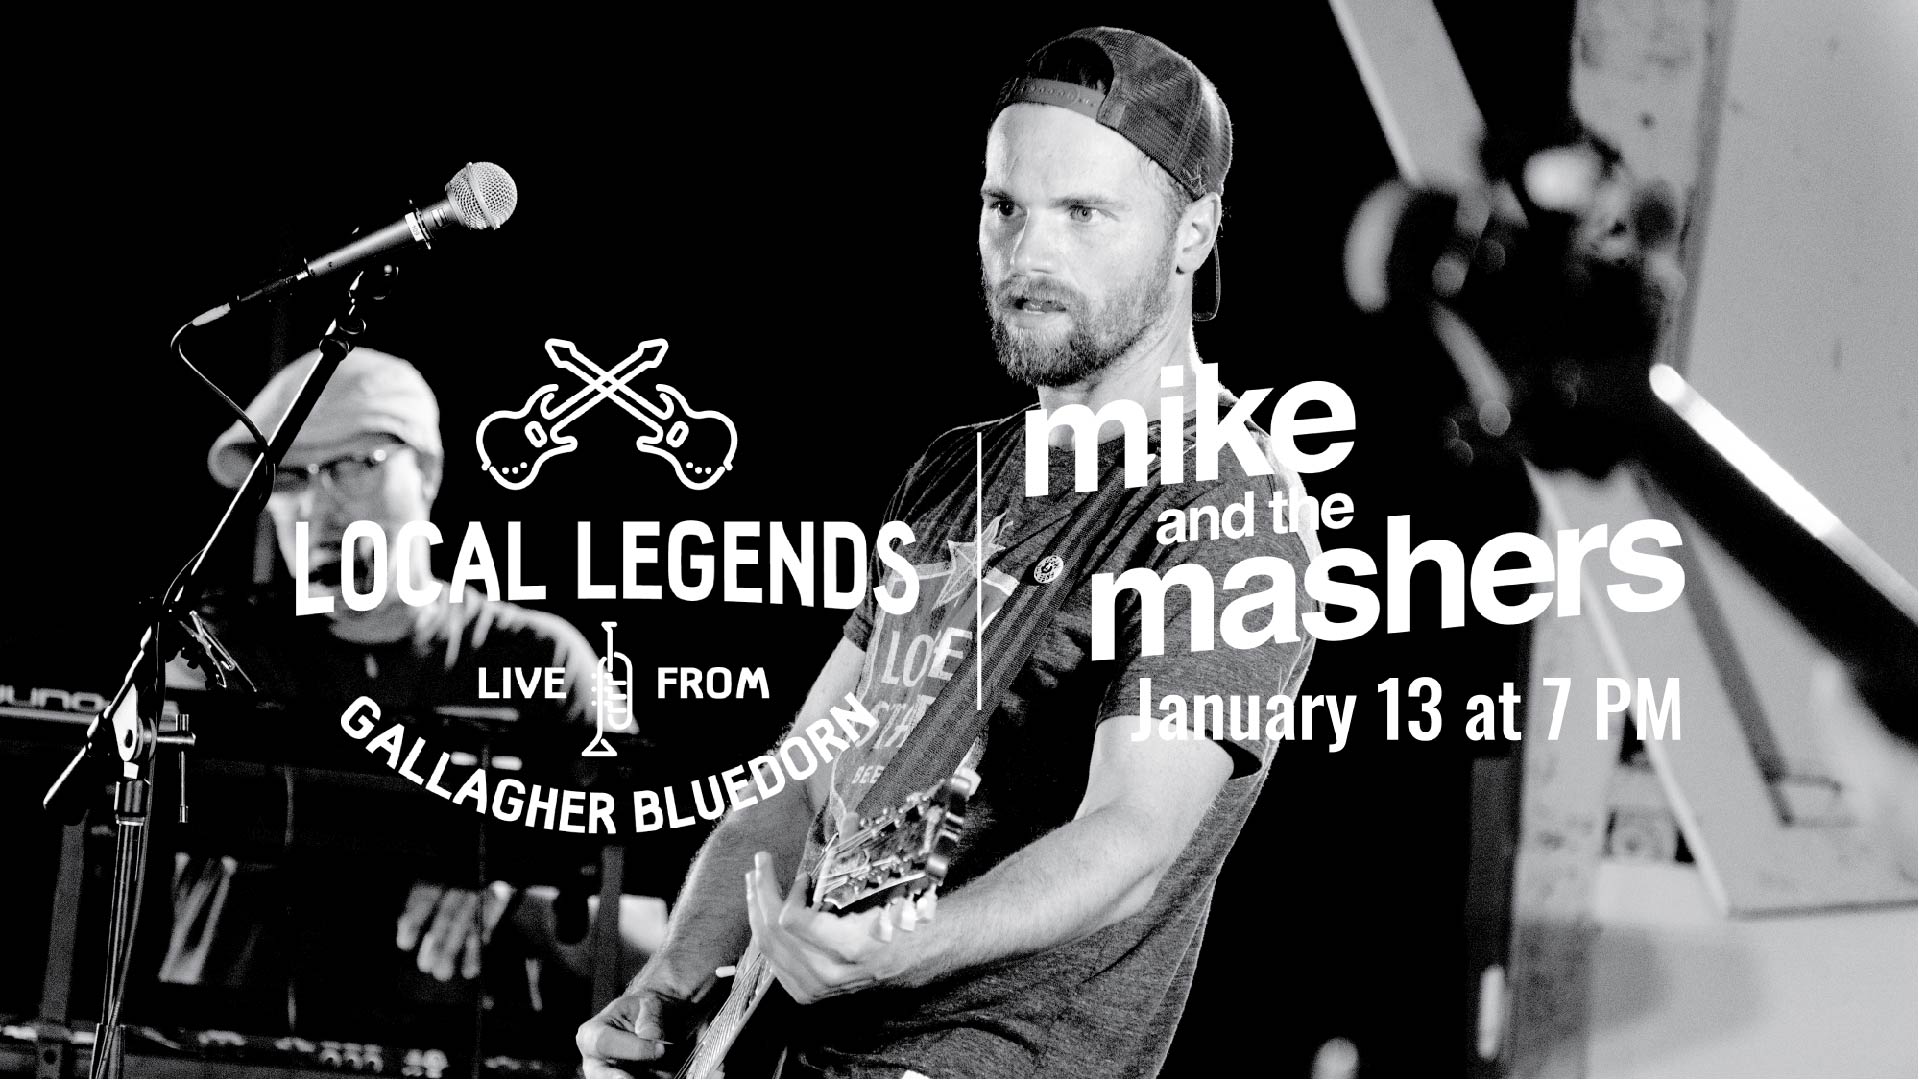 Local Legends Mike and the Mashers